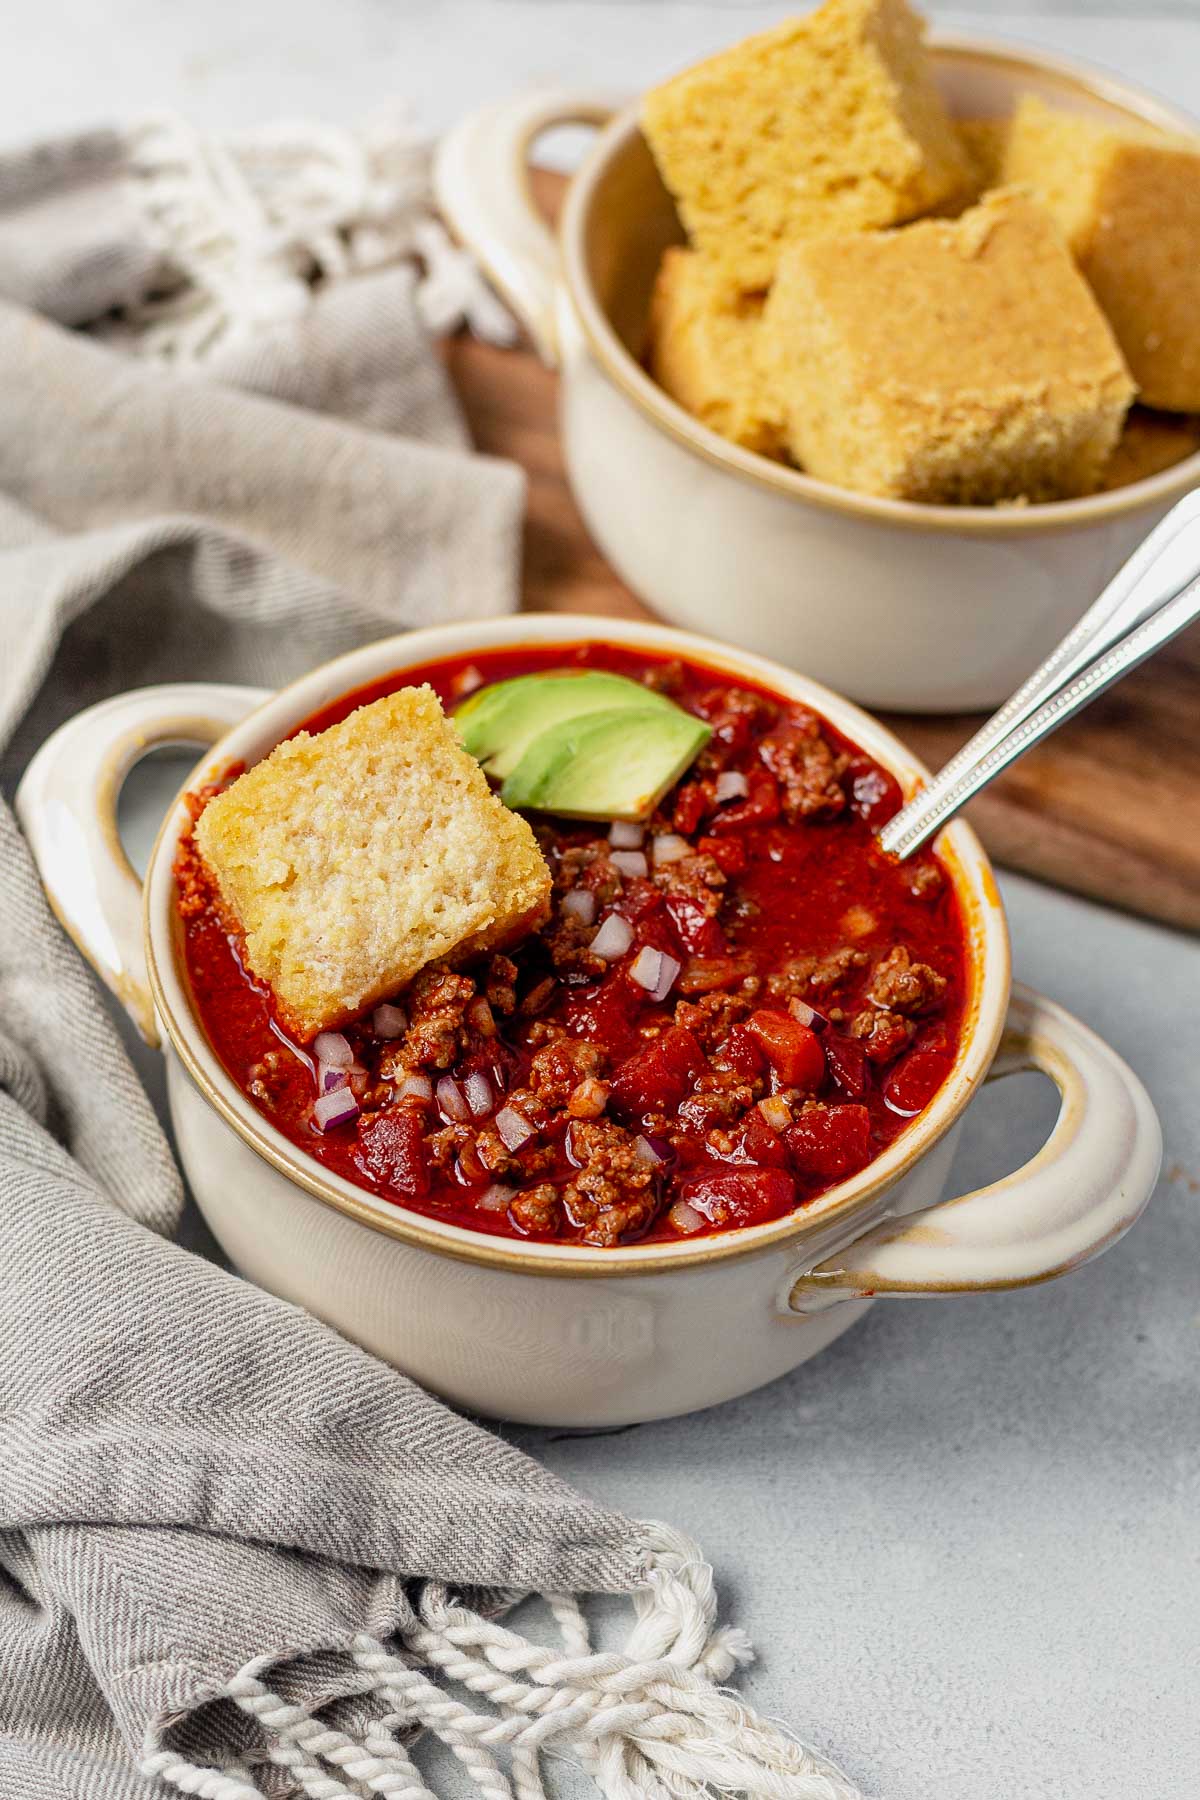 beanless chili in a white bowl with avocado and cornbread